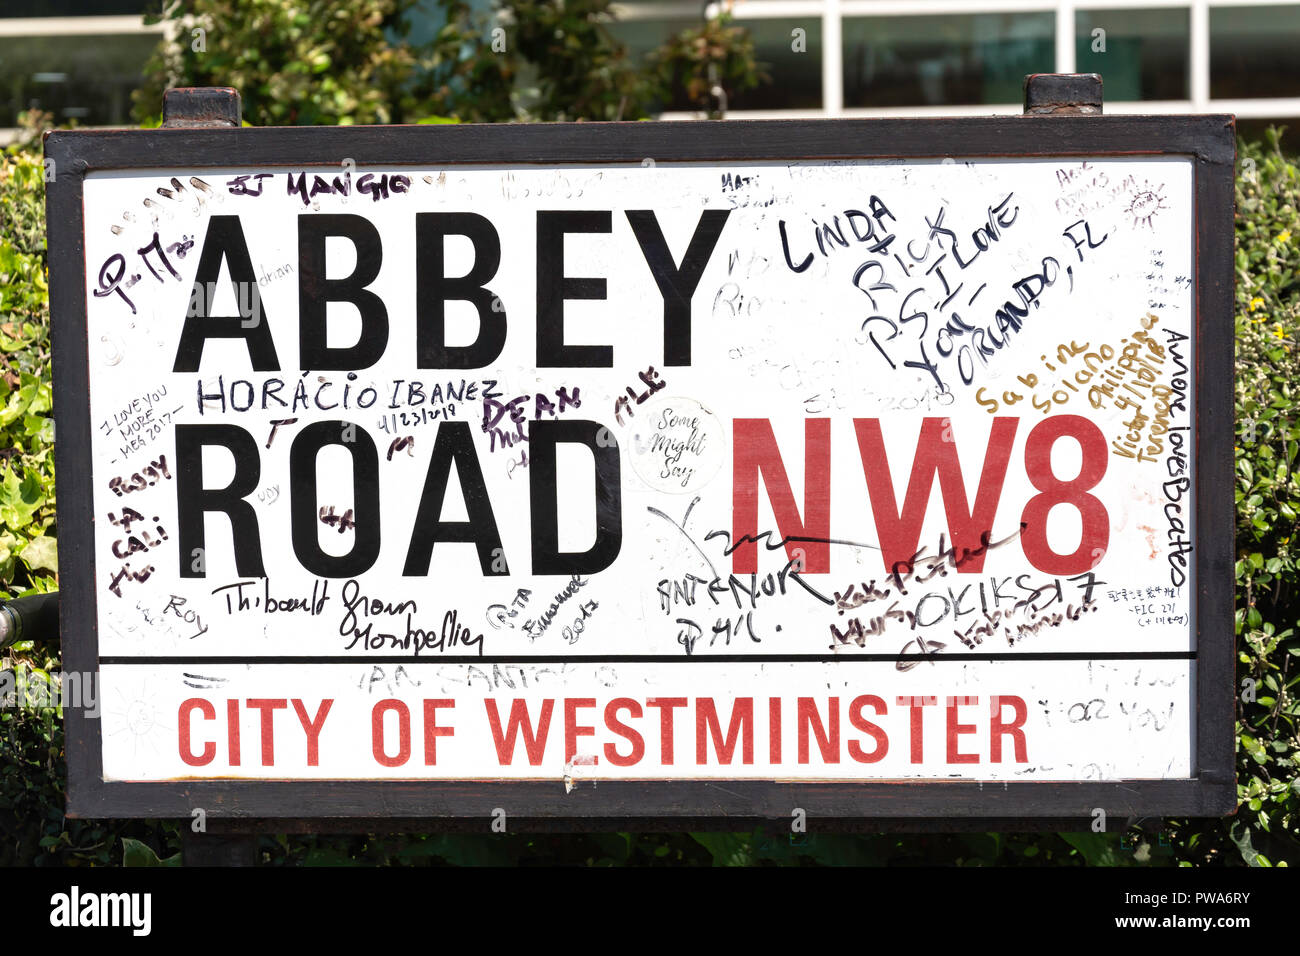 Graffiti on street sign, Abbey Road, St John's Wood, City of Westminster, Greater London, England, United Kingdom Stock Photo